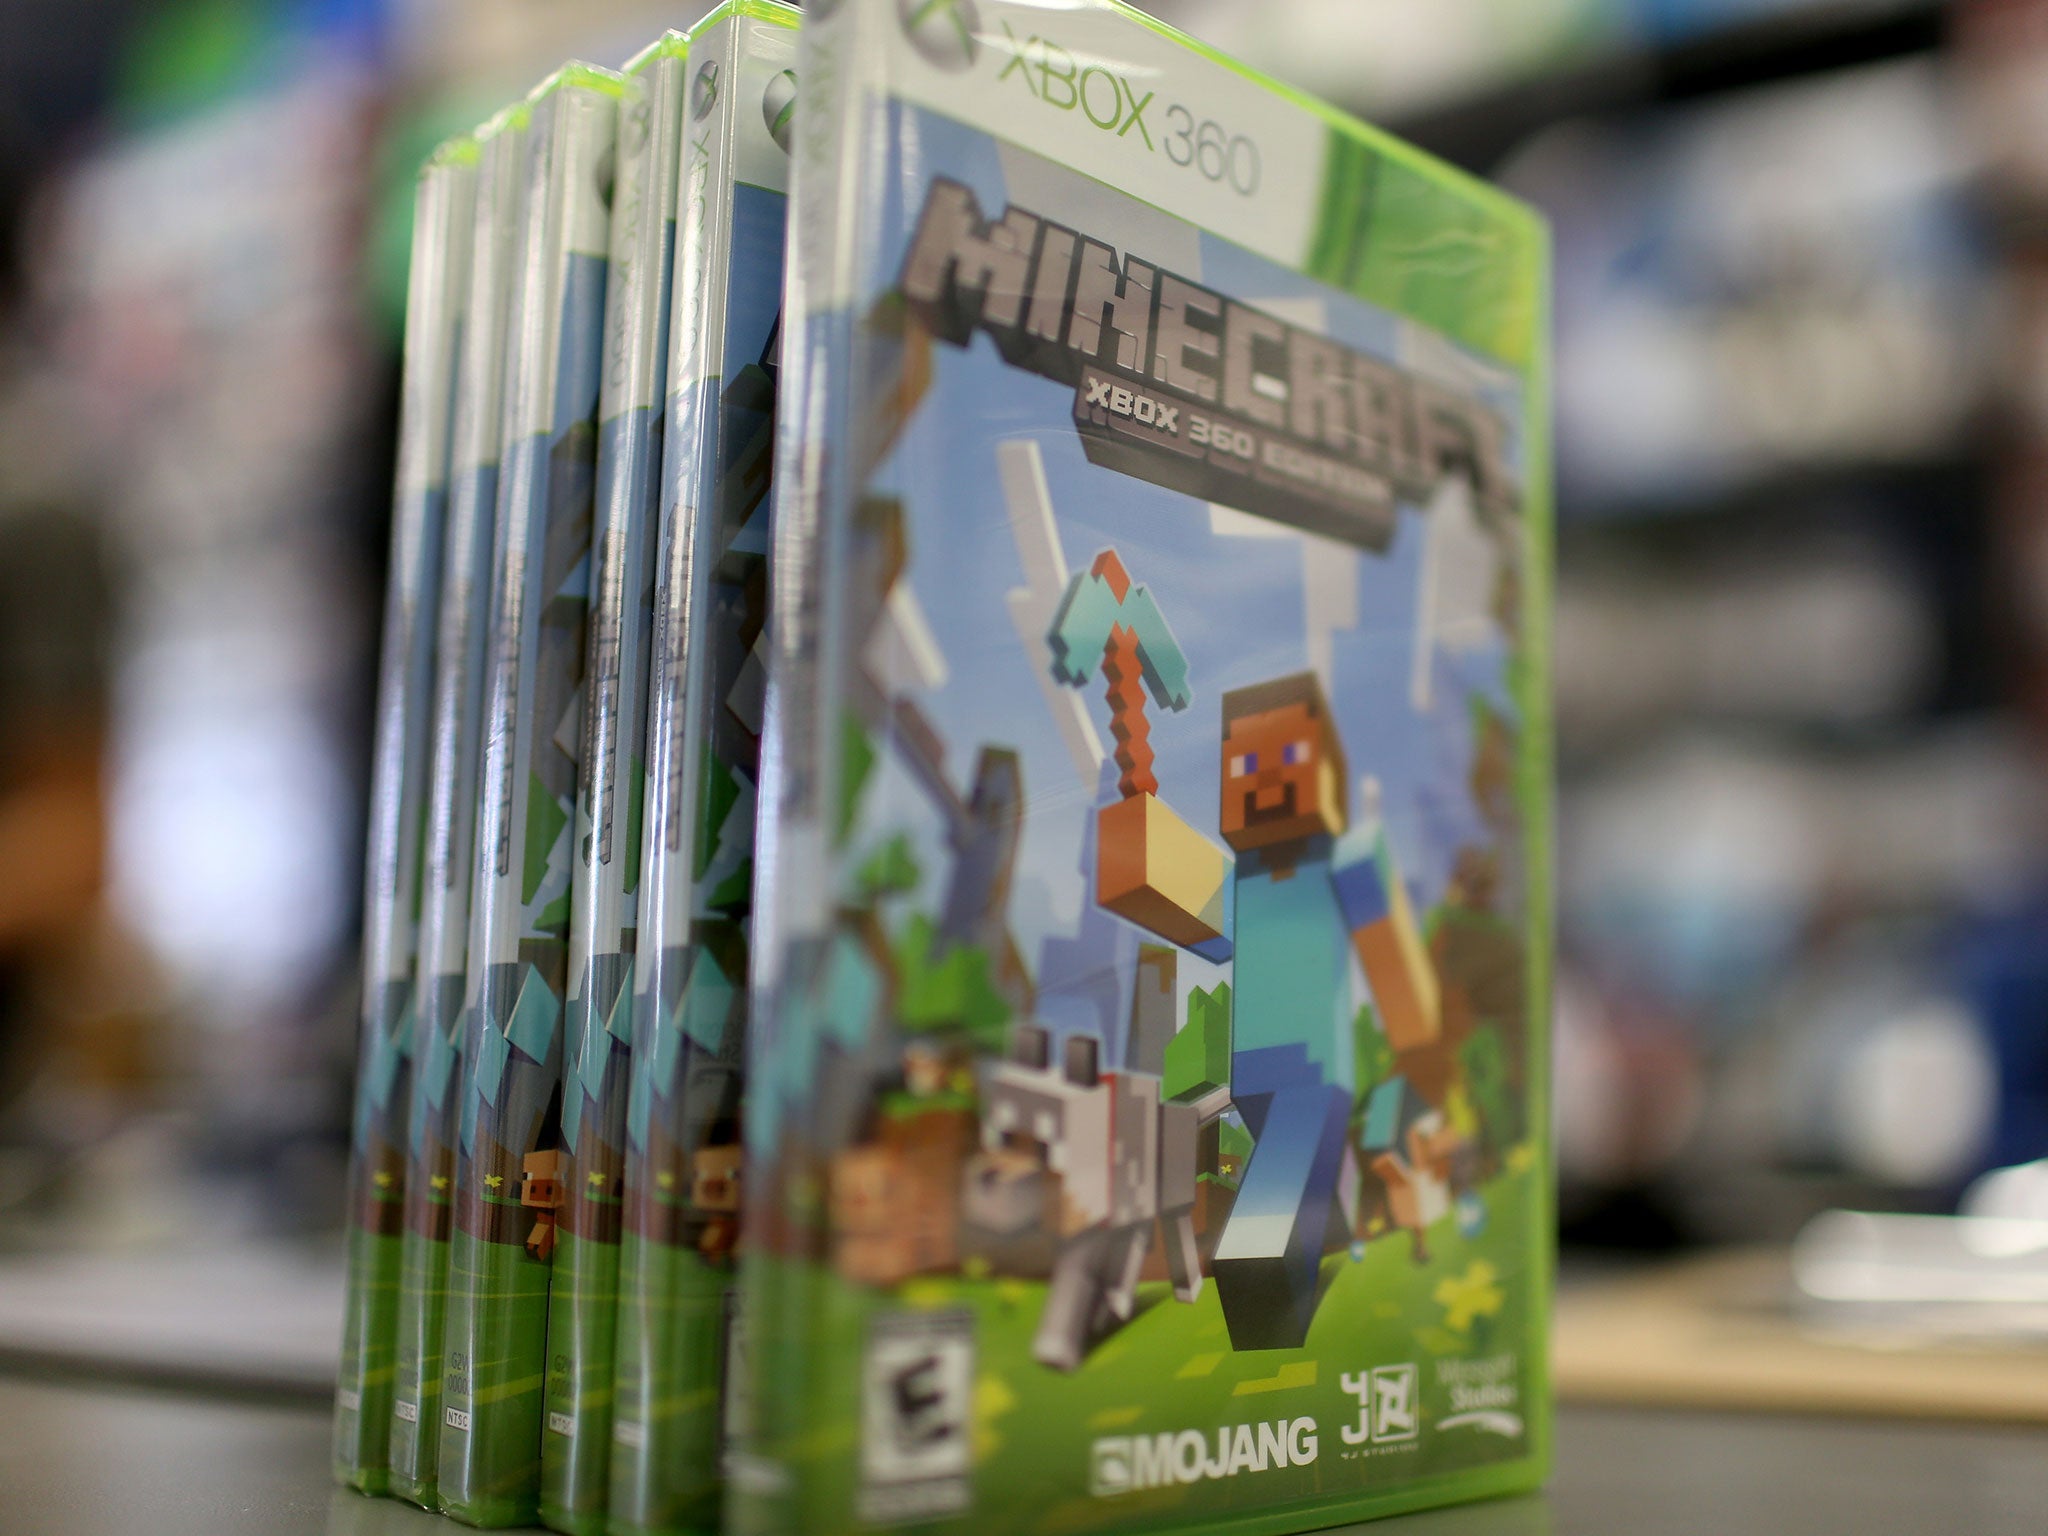 An XBox 360 Minecraft game is seen at a GameStop store on Septemeber 15, 2014 in Miami, Florida. Microsoft today announced it will acquire video game maker Mojang and its popular Minecraft game for $2.5 billion.